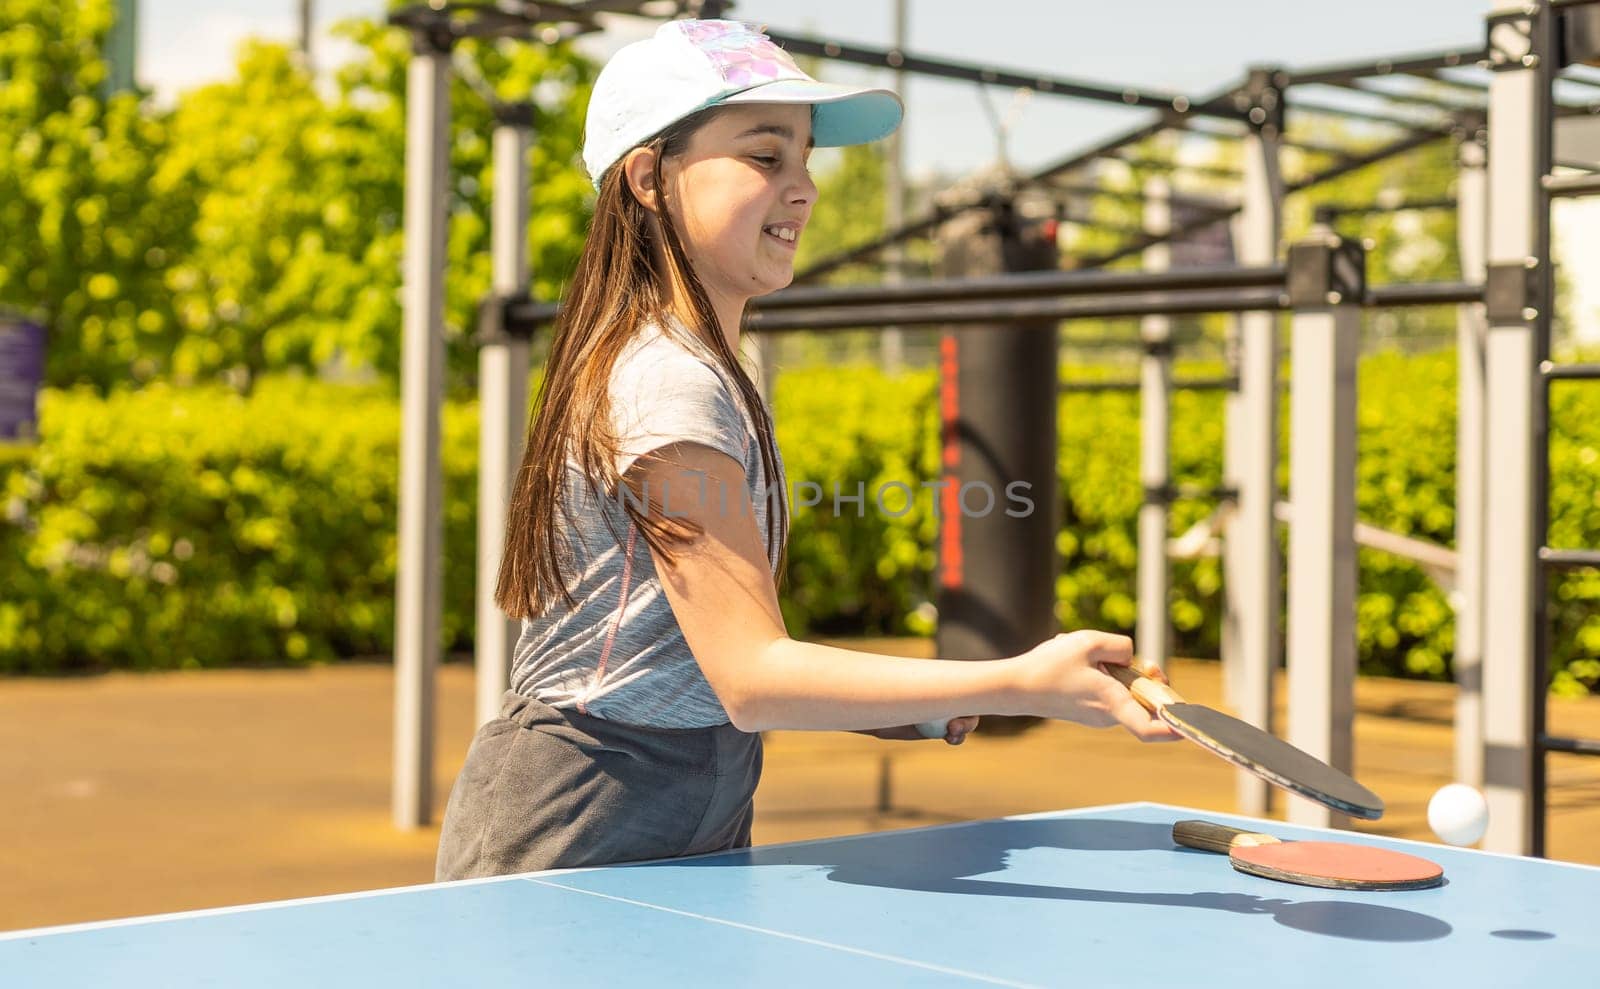 Little girl playing ping pong in park by Andelov13